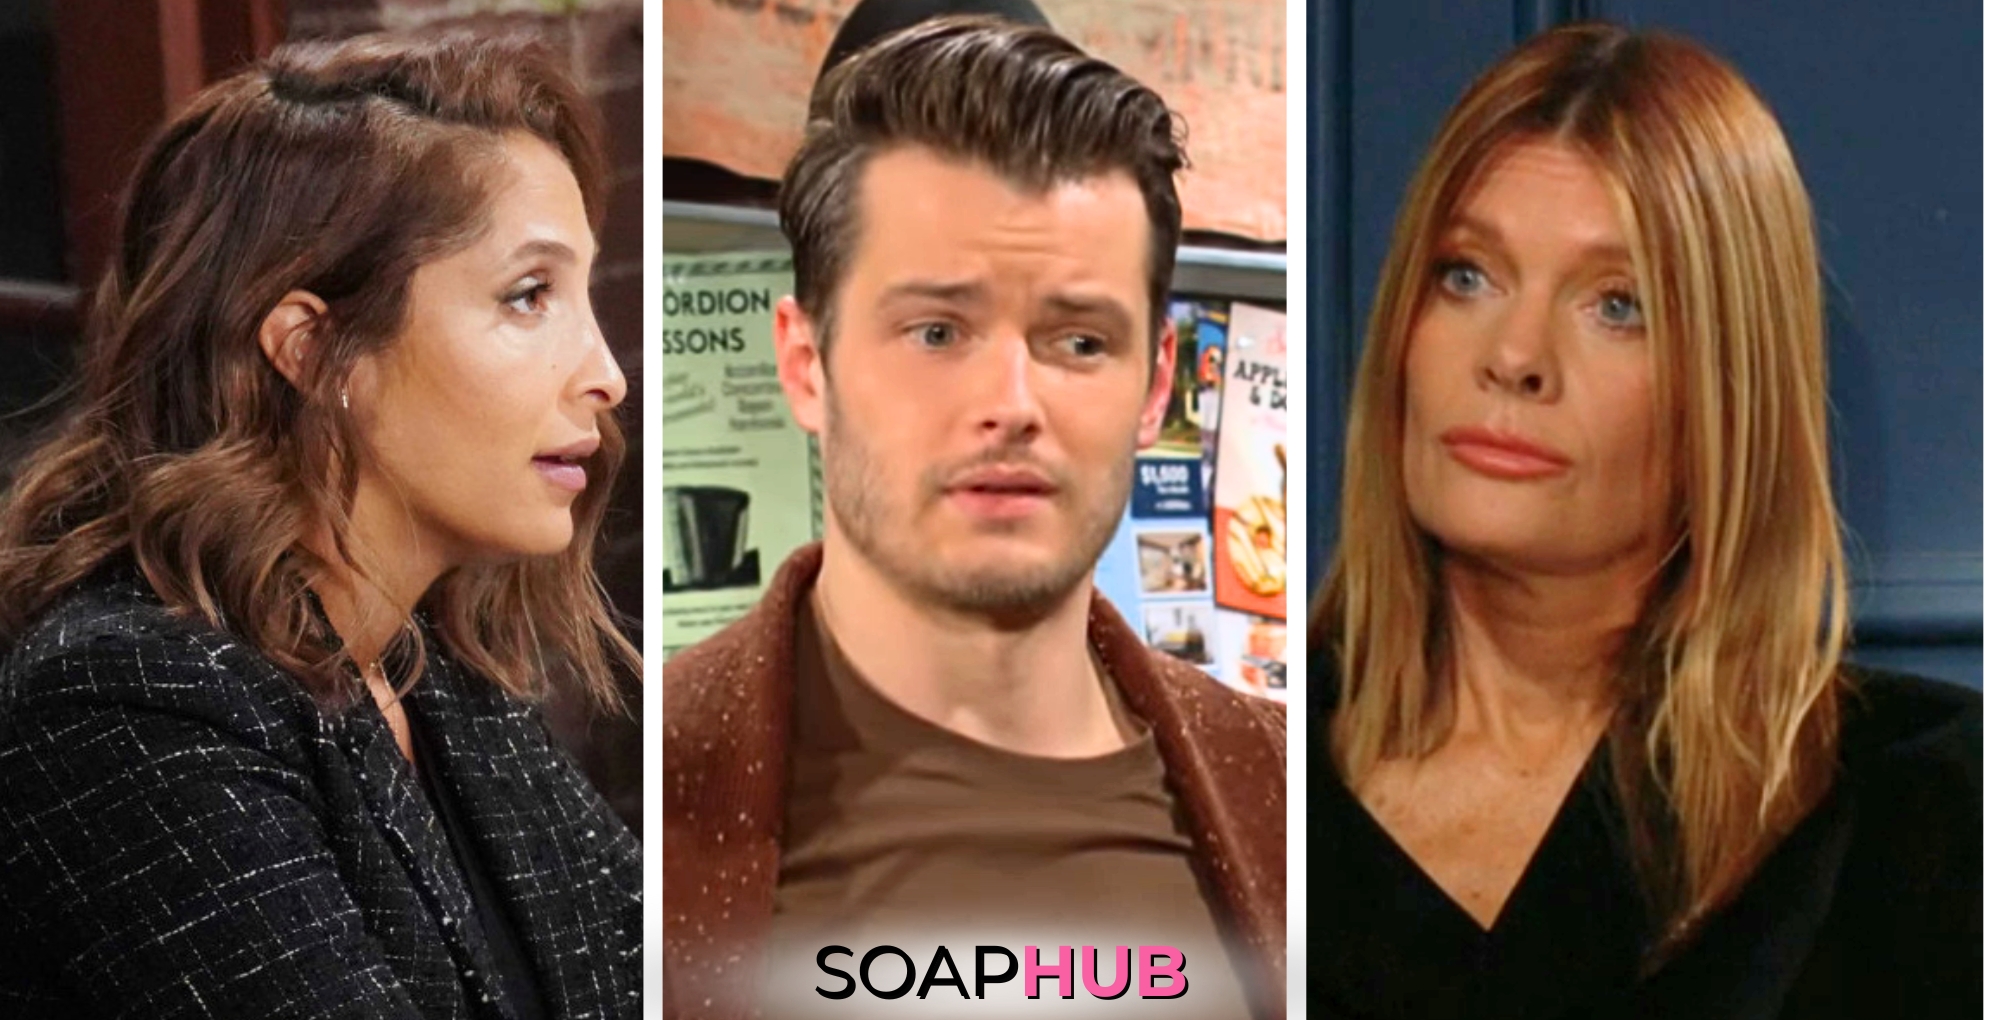 Young and the Restless Spoilers Weekly Update features Lily, Kyle, and Phyllis with the Soap Hub logo across the bottom.